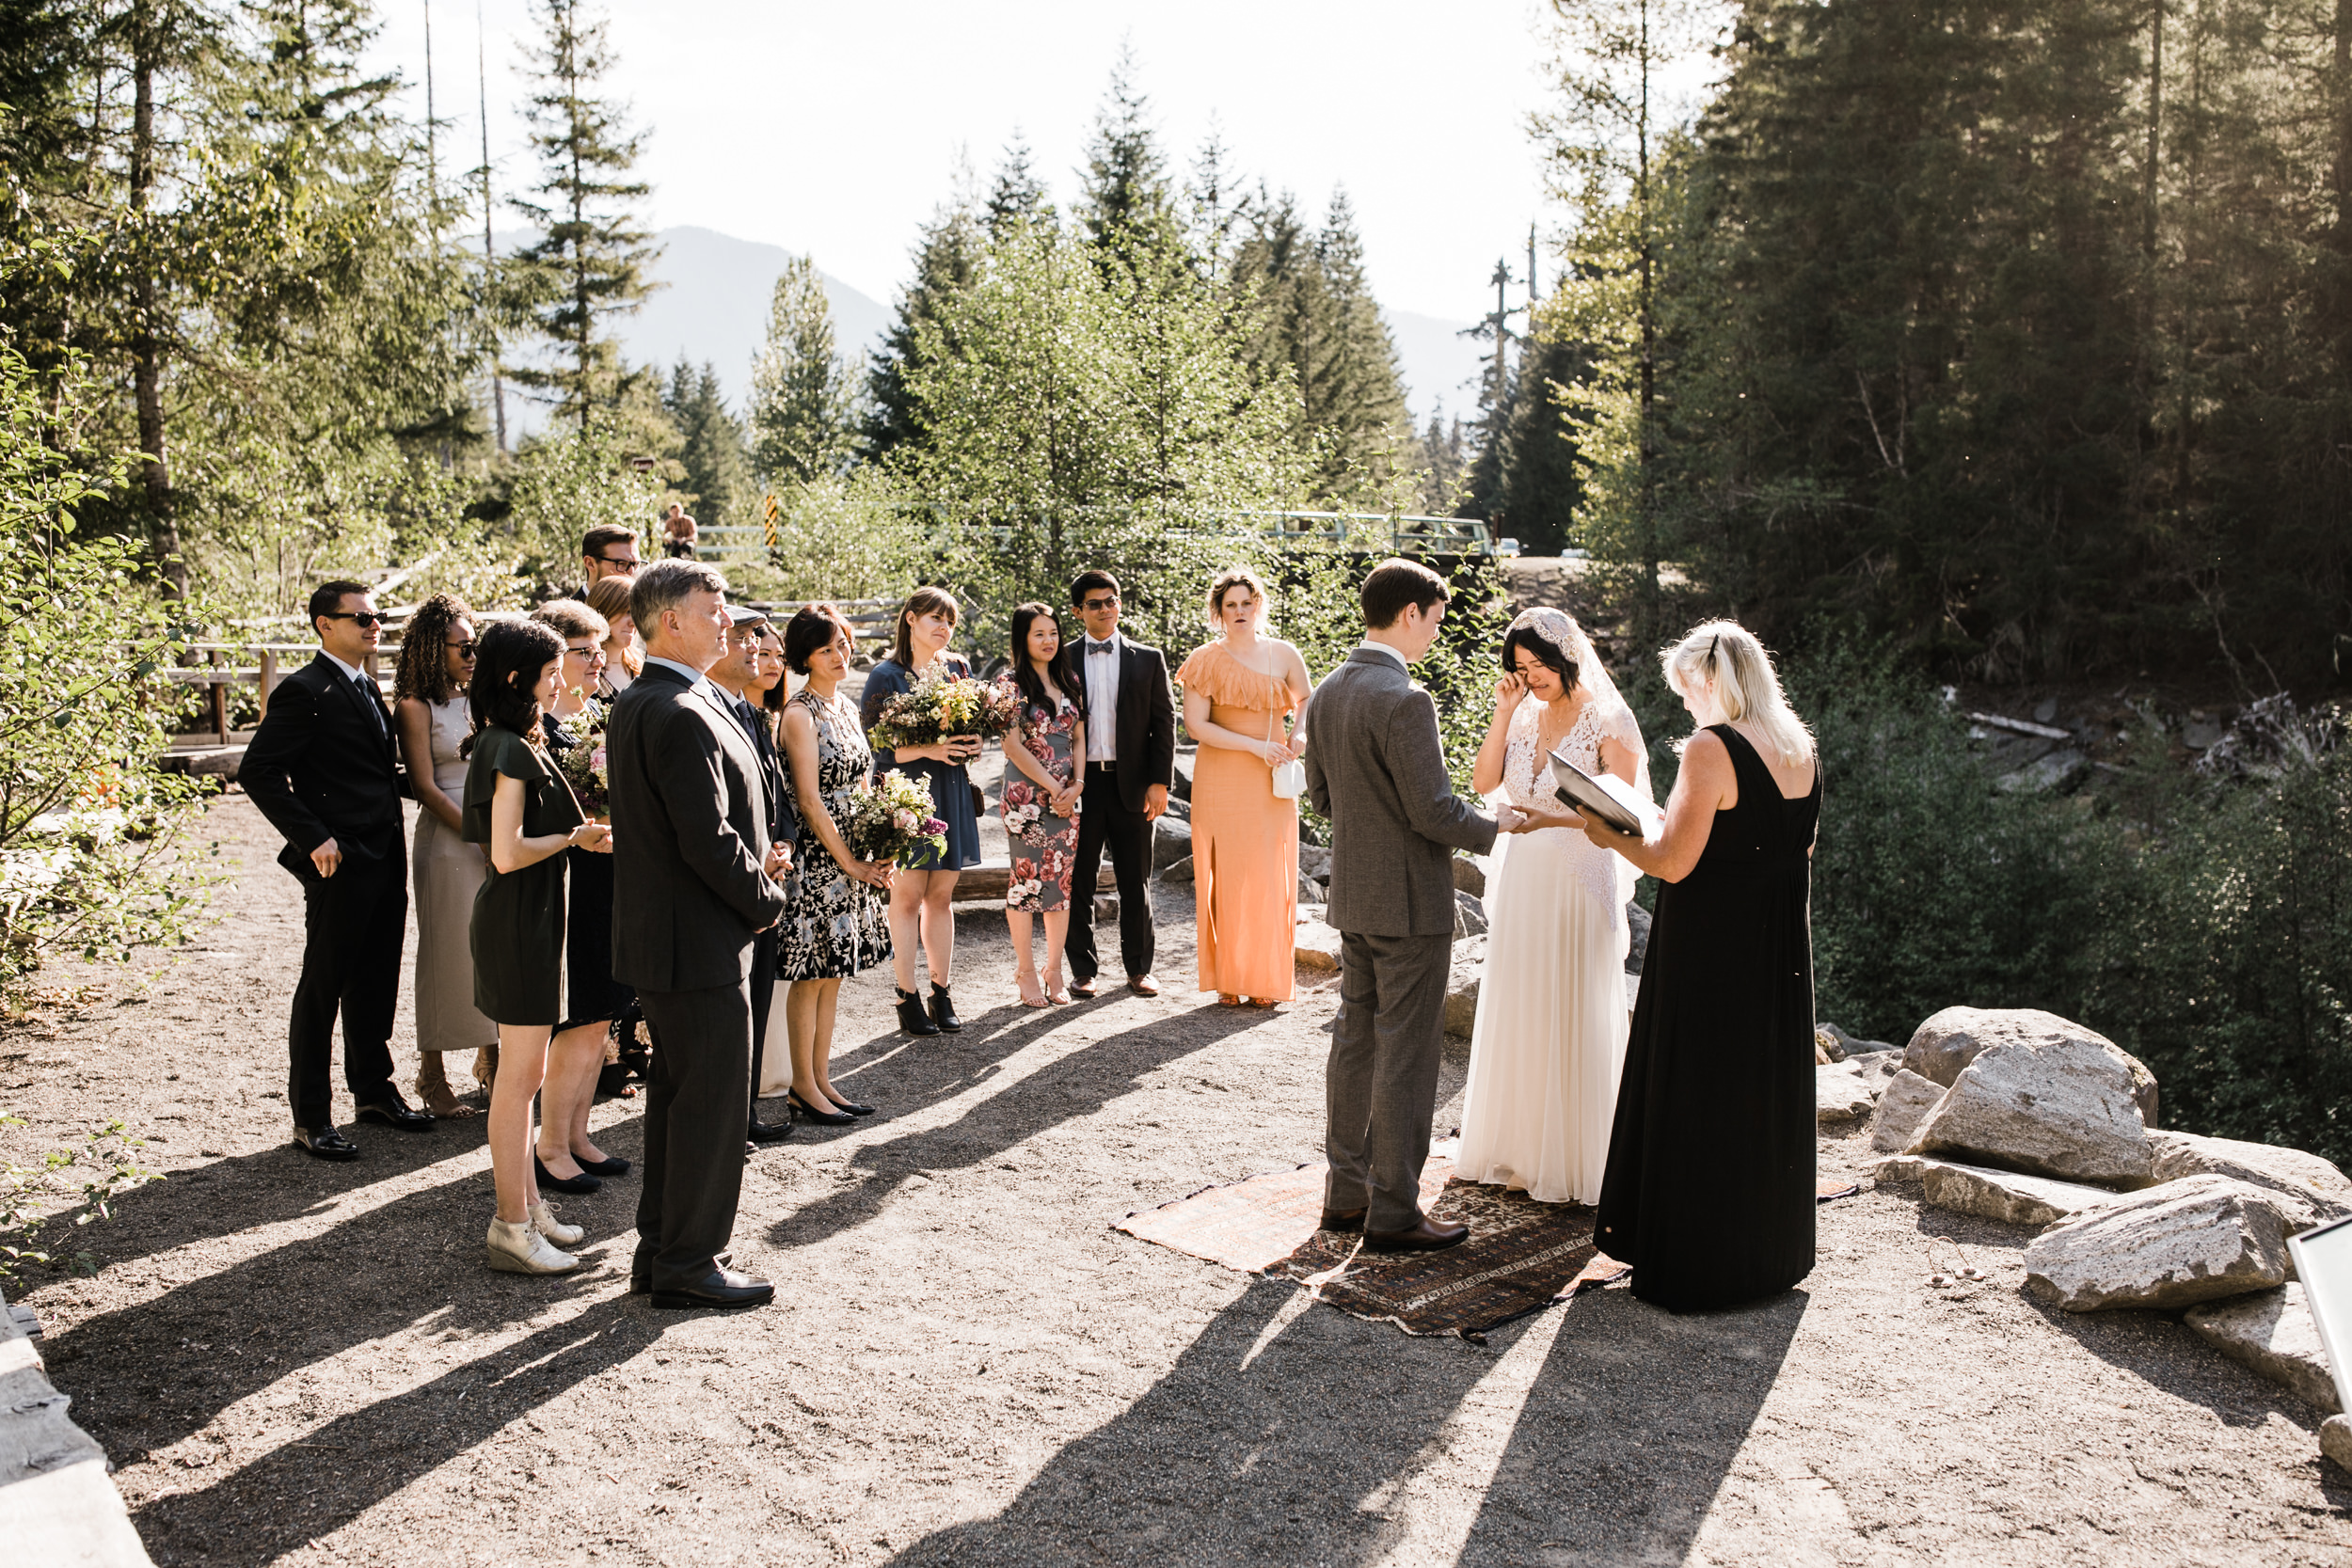 intimate wedding and reception in mount rainier national park | a frame cabin elopement first look | woodsy small reception in washington | snowy wedding portraits | elopement in the mountains